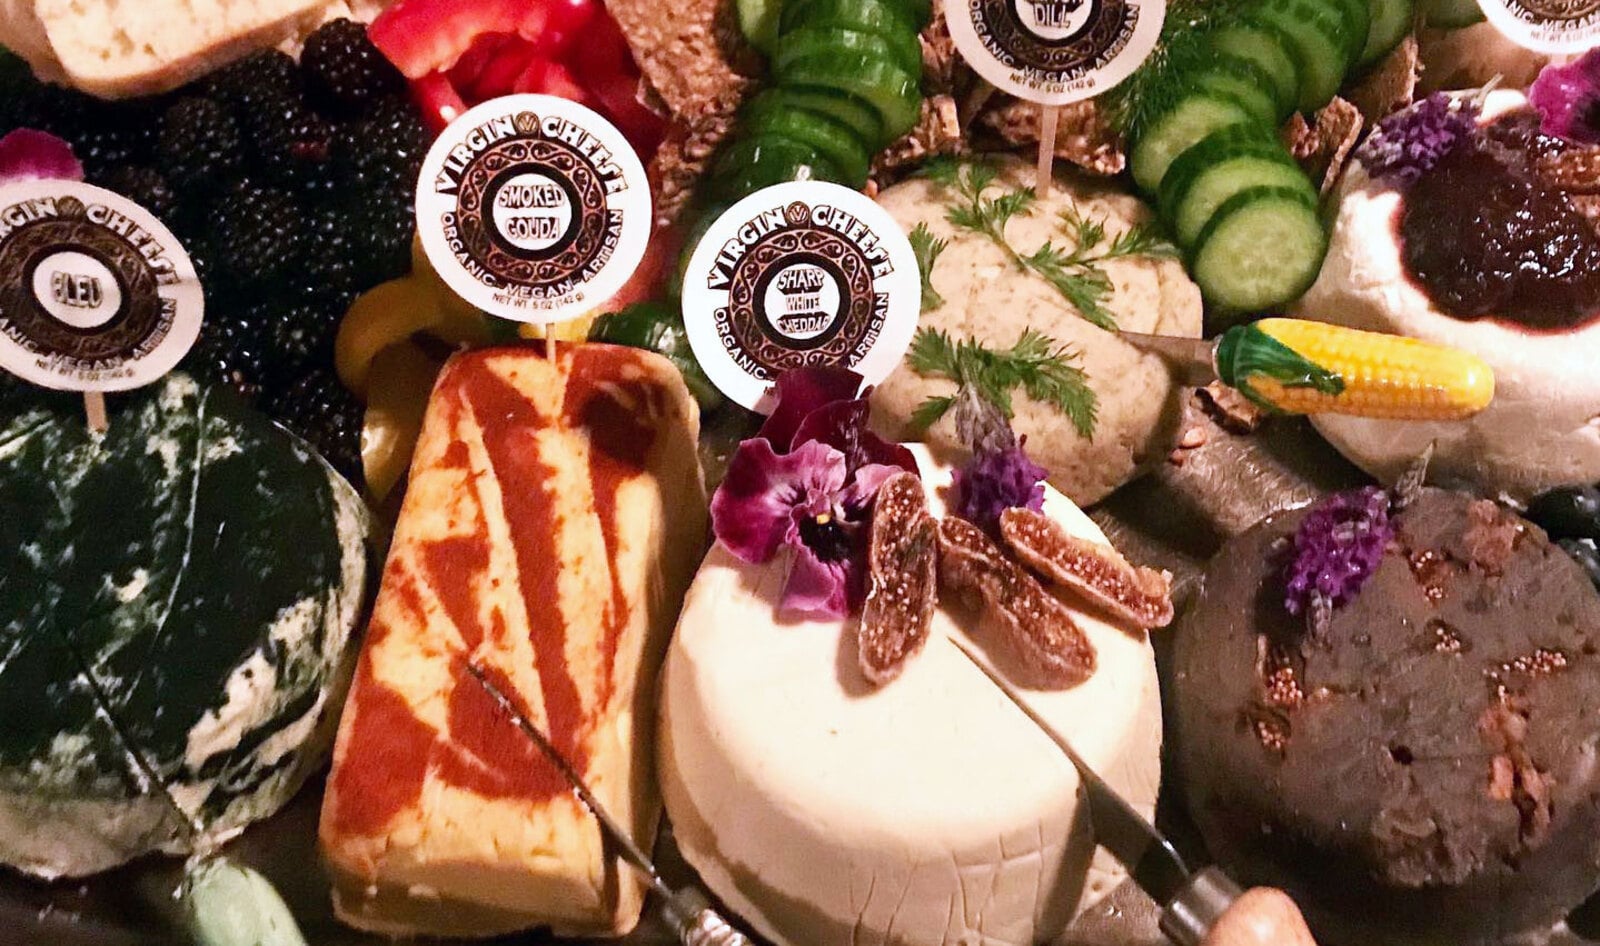 An All-Vegan Cheese Shop Just Opened in the Middle of Arizona